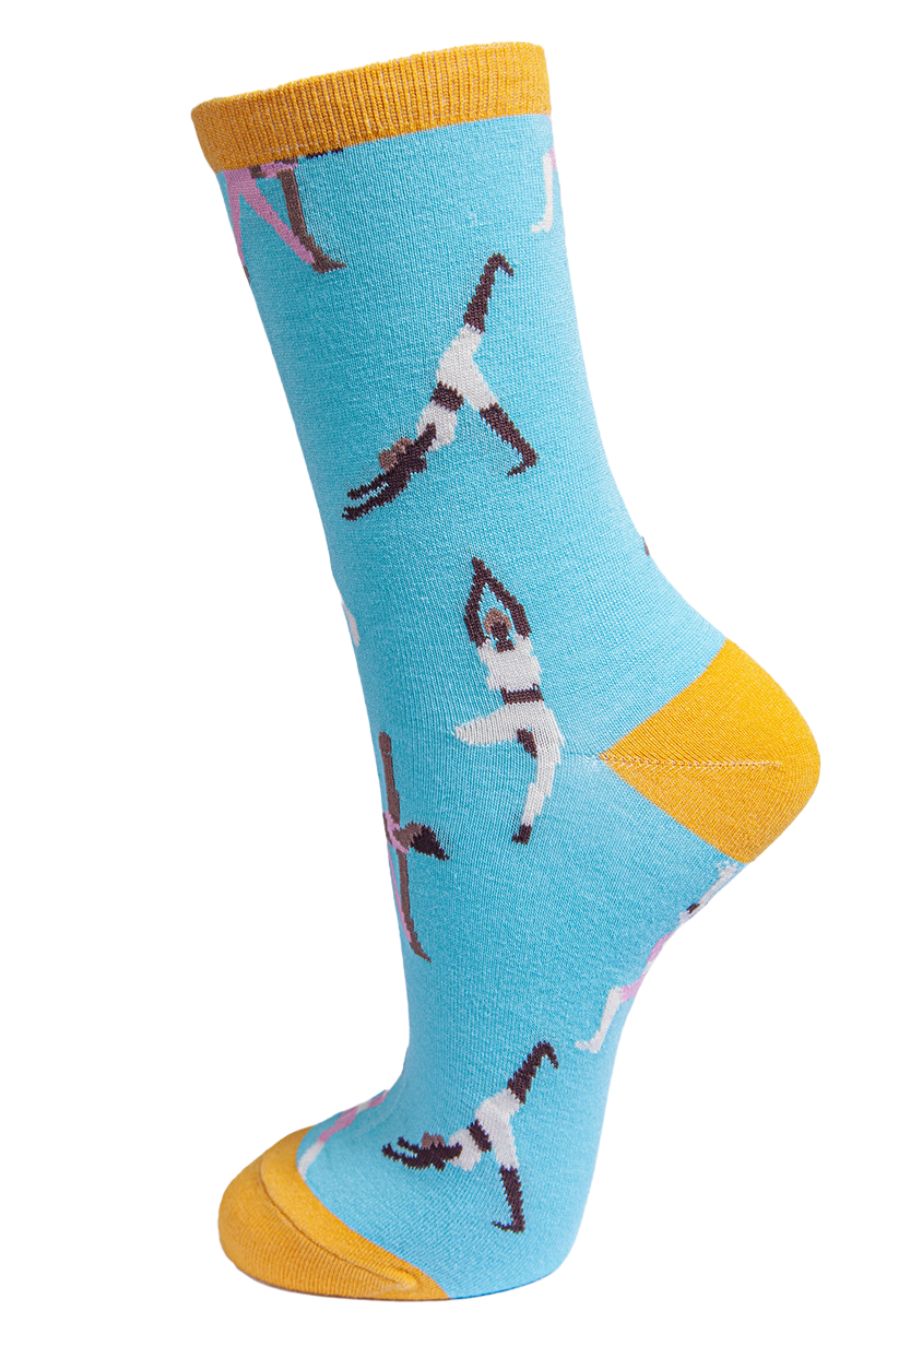 blue, yellow ankle socks with cartoon people in yoga poses